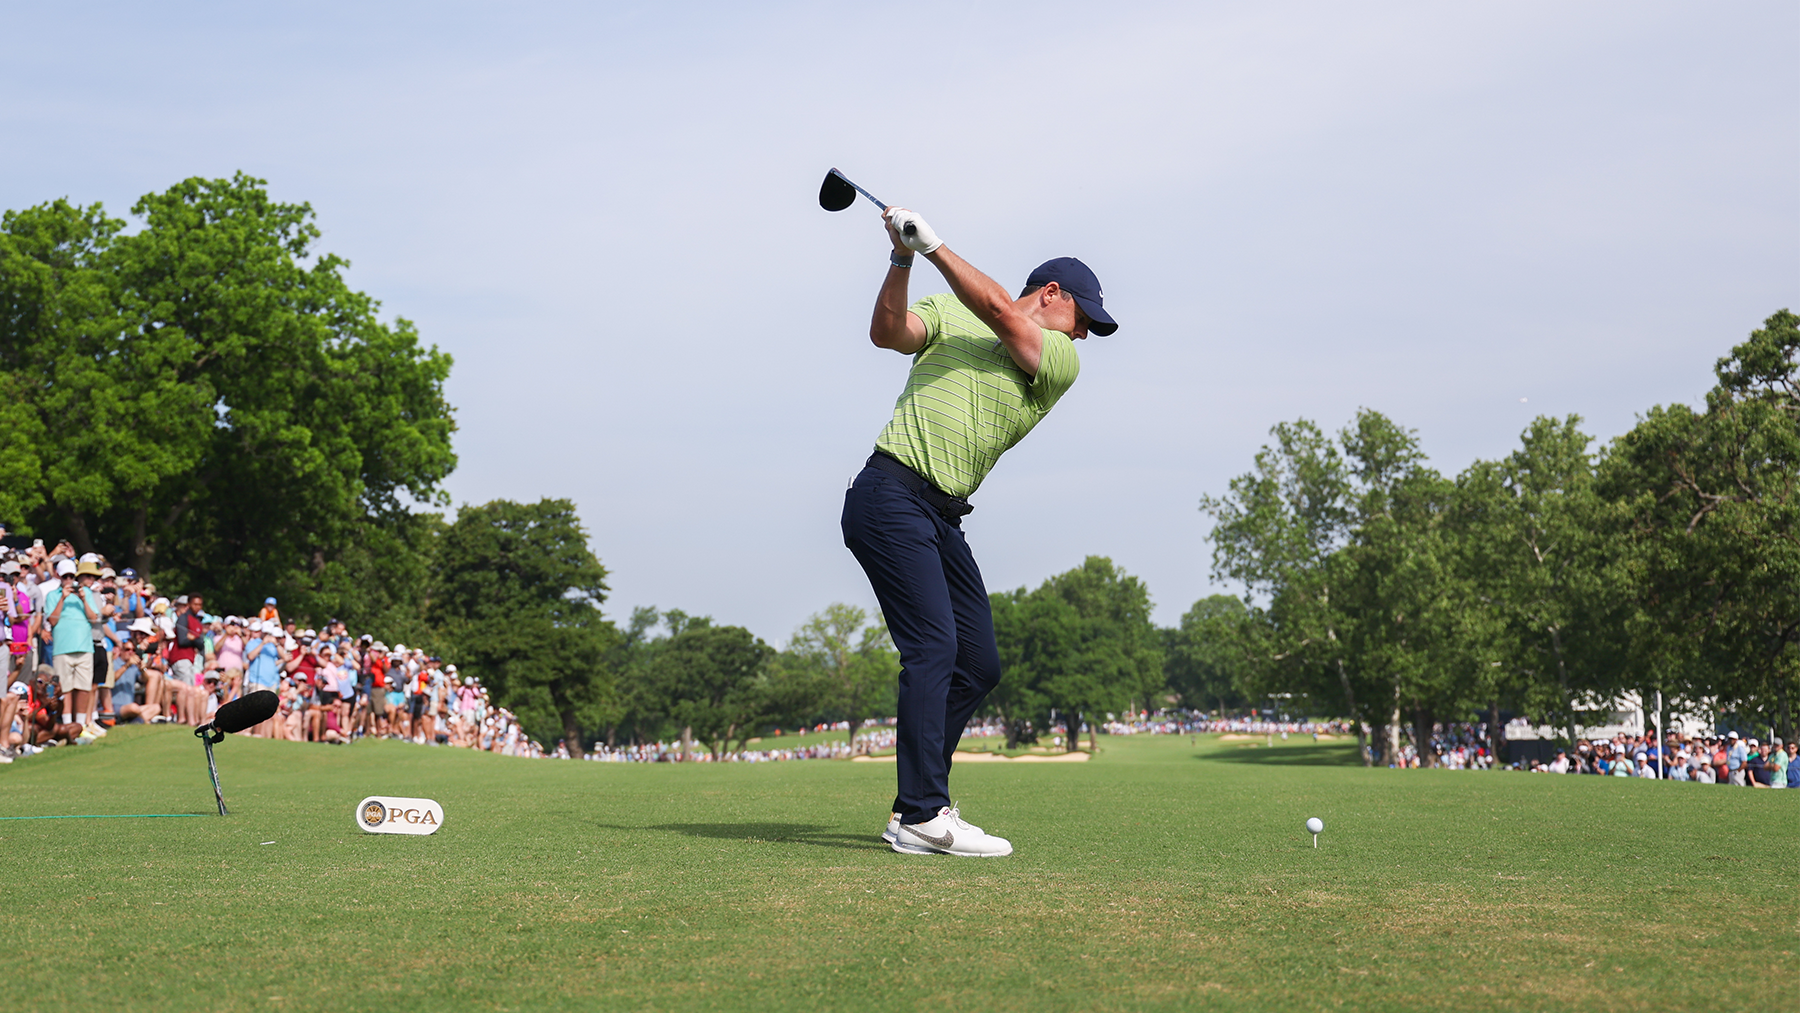 Rory McIlroy of Northern Ireland hits his shot from the 16th tee during the first round of the 2022 PGA Championship at the Southern Hills on May 19, 2022 in Tulsa, Oklahoma. (Photo by Maddie Meyer/PGA of America)